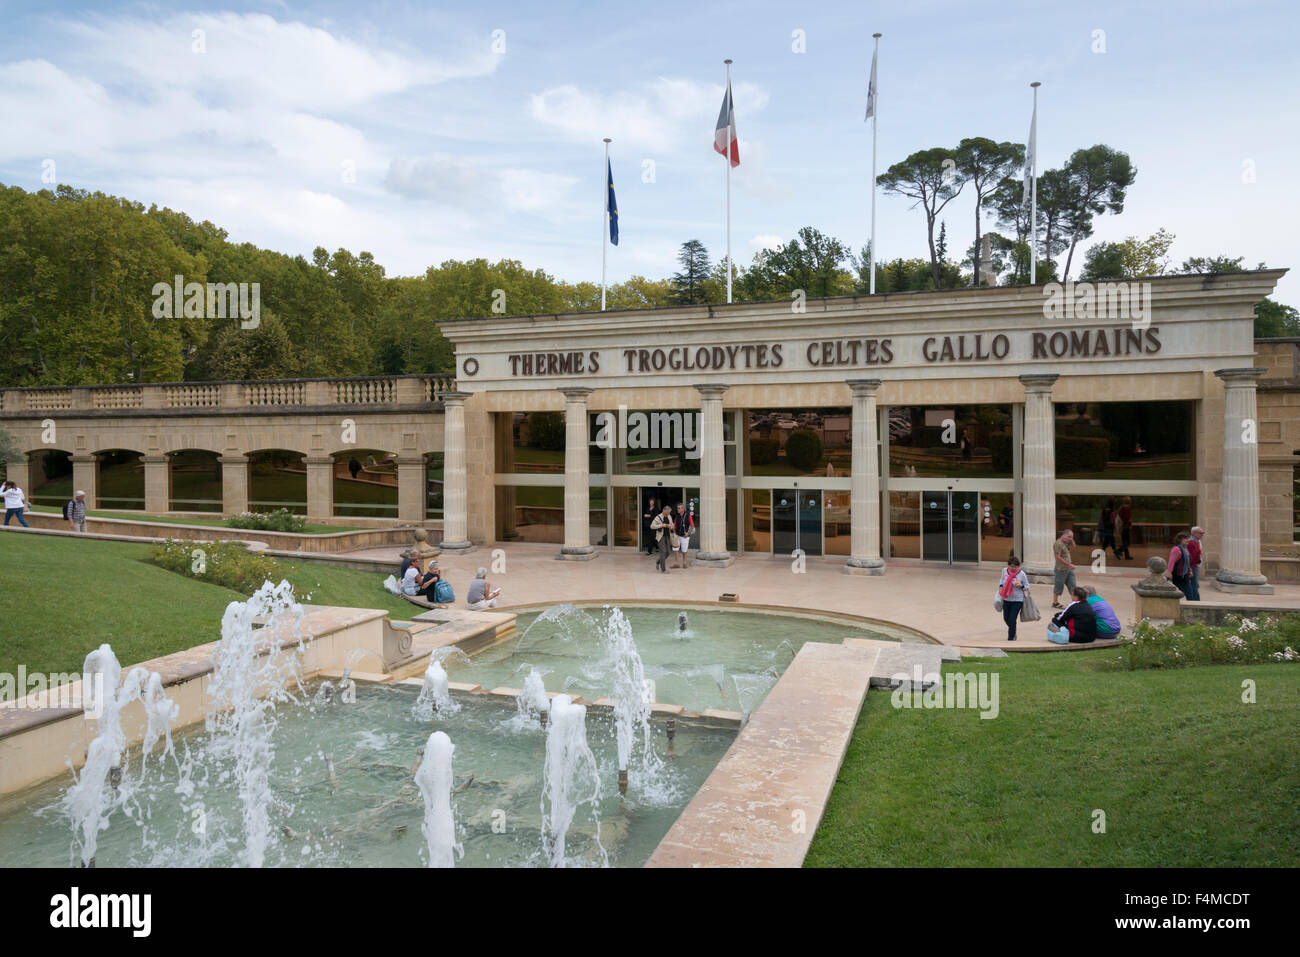 The troglodytic spa complex and thermal baths at Greoux Les Bains Provence France Stock Photo